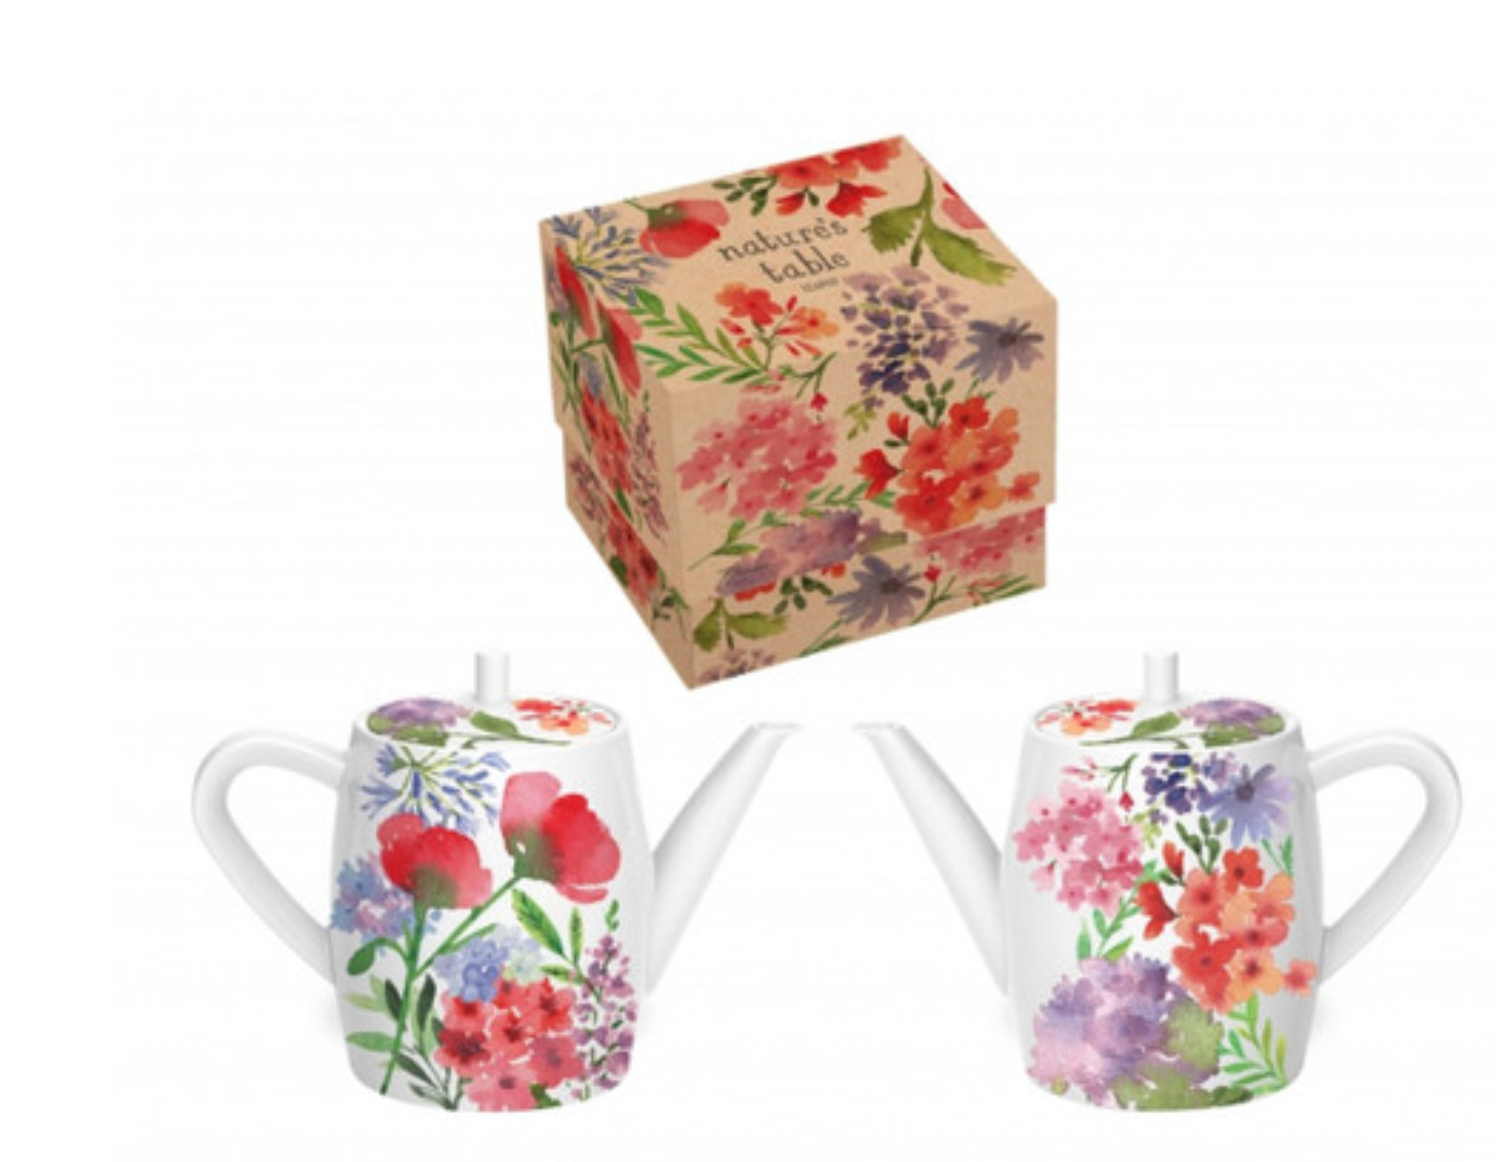 Nature's Table White and Floral Blooming Teapot in gift box